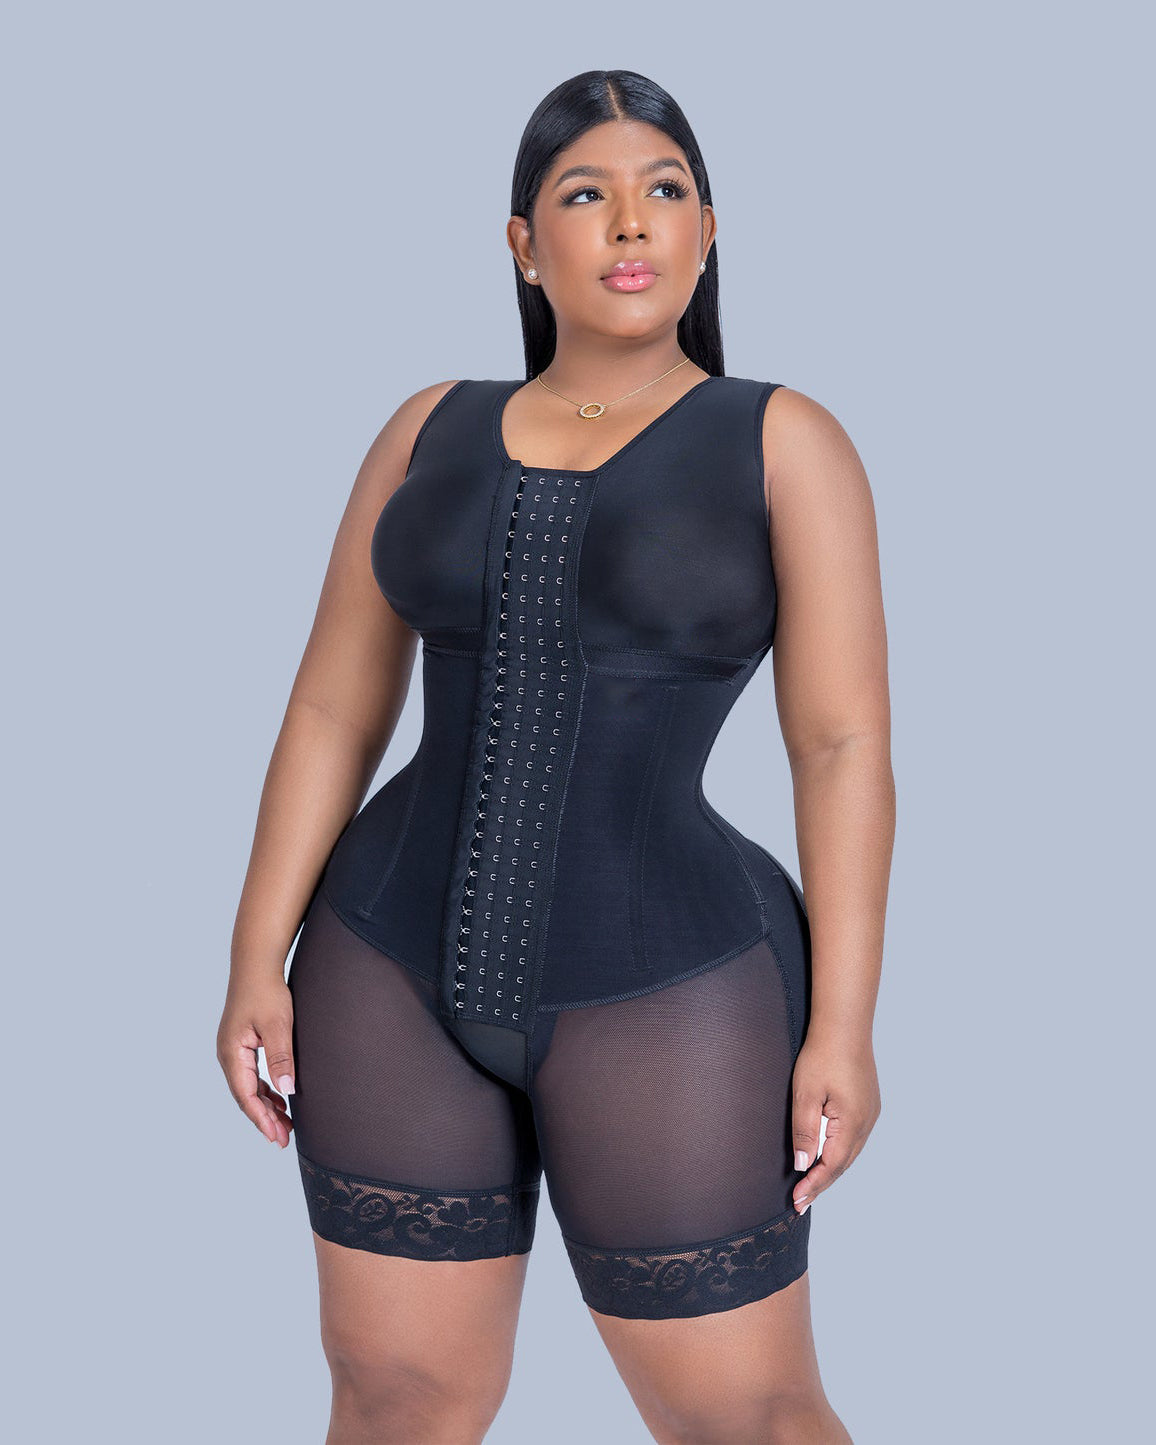 High Double Compression Tummy Control Full Body Shaper With Hook